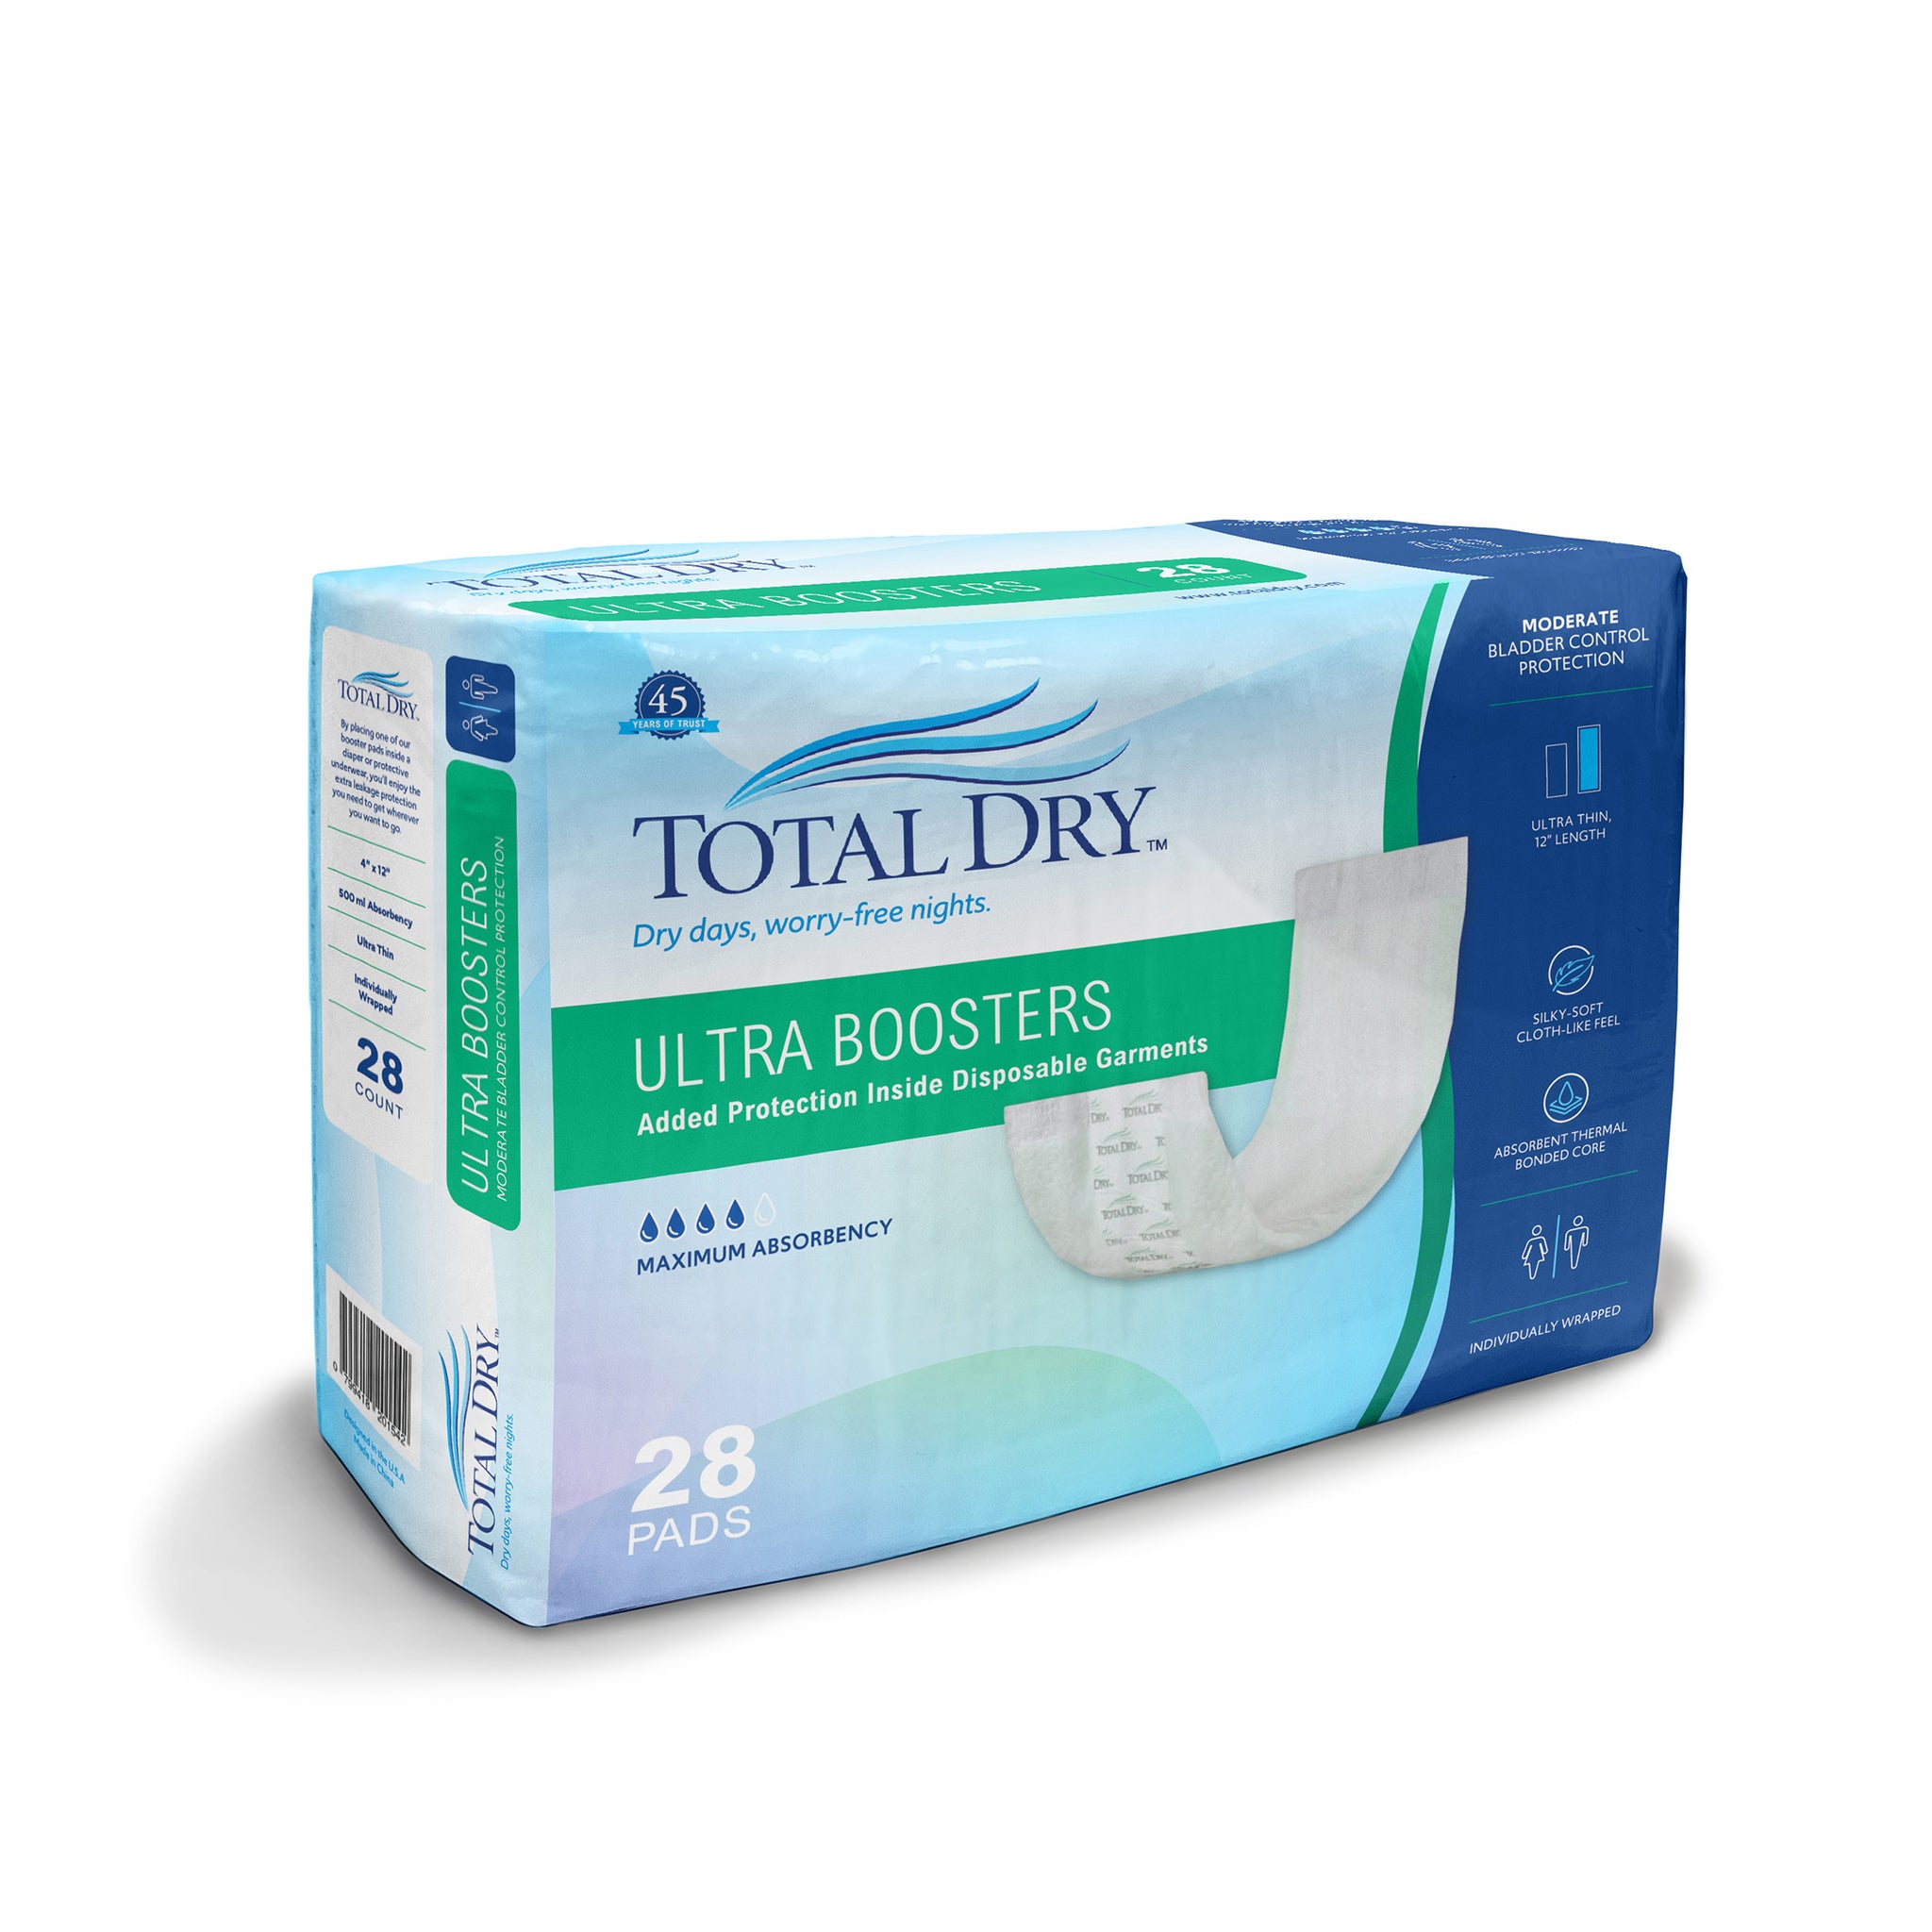 TotalDry Ultra Boosters Sample (2 Pieces)